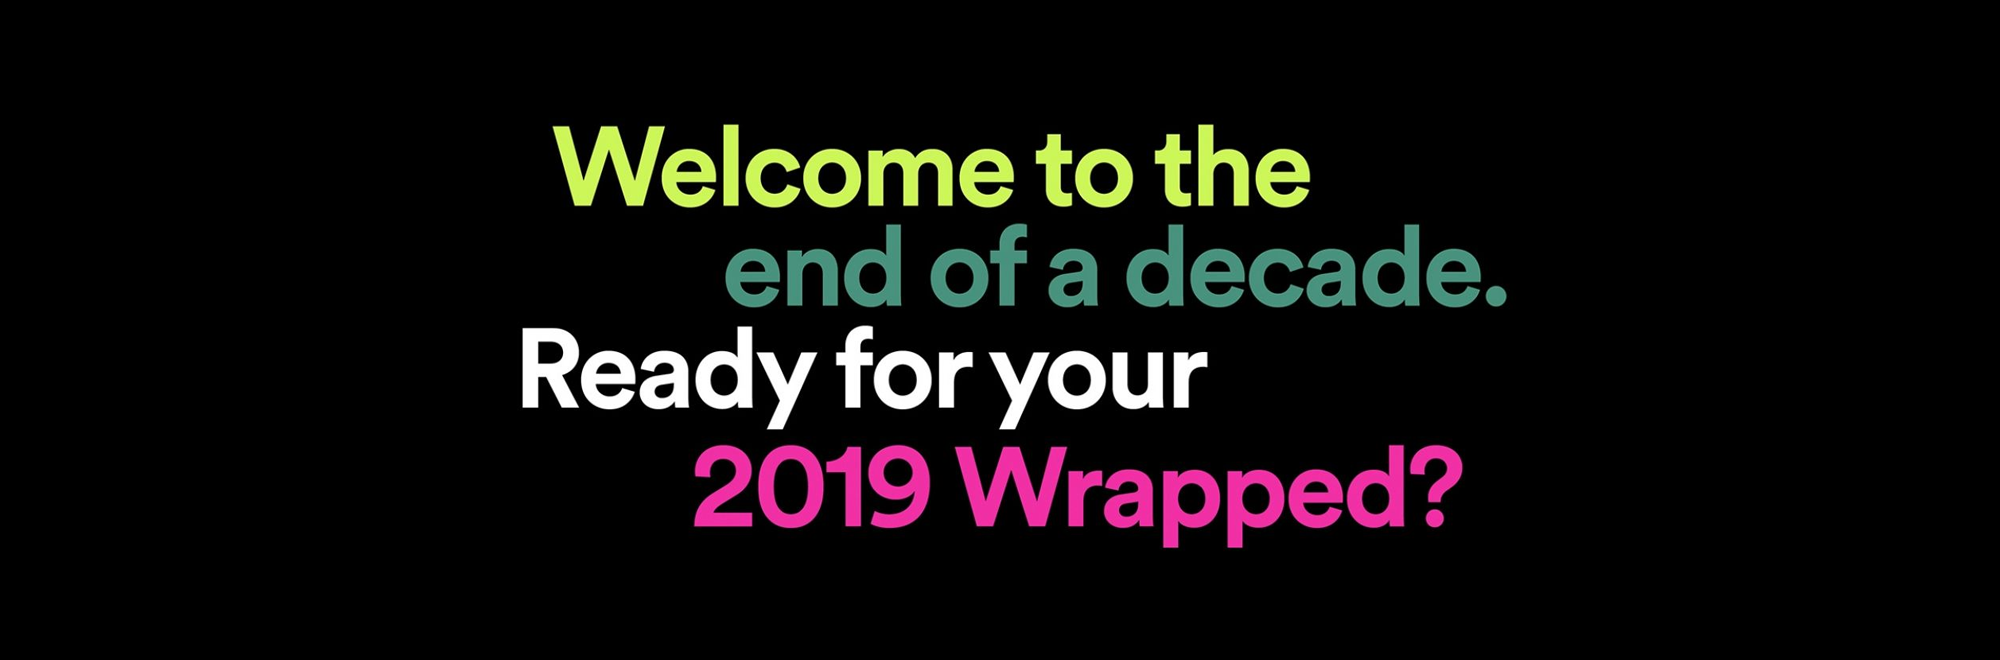 Why Spotify's personalised playlist "Wrapped" campaign was the perfect New Year's gift